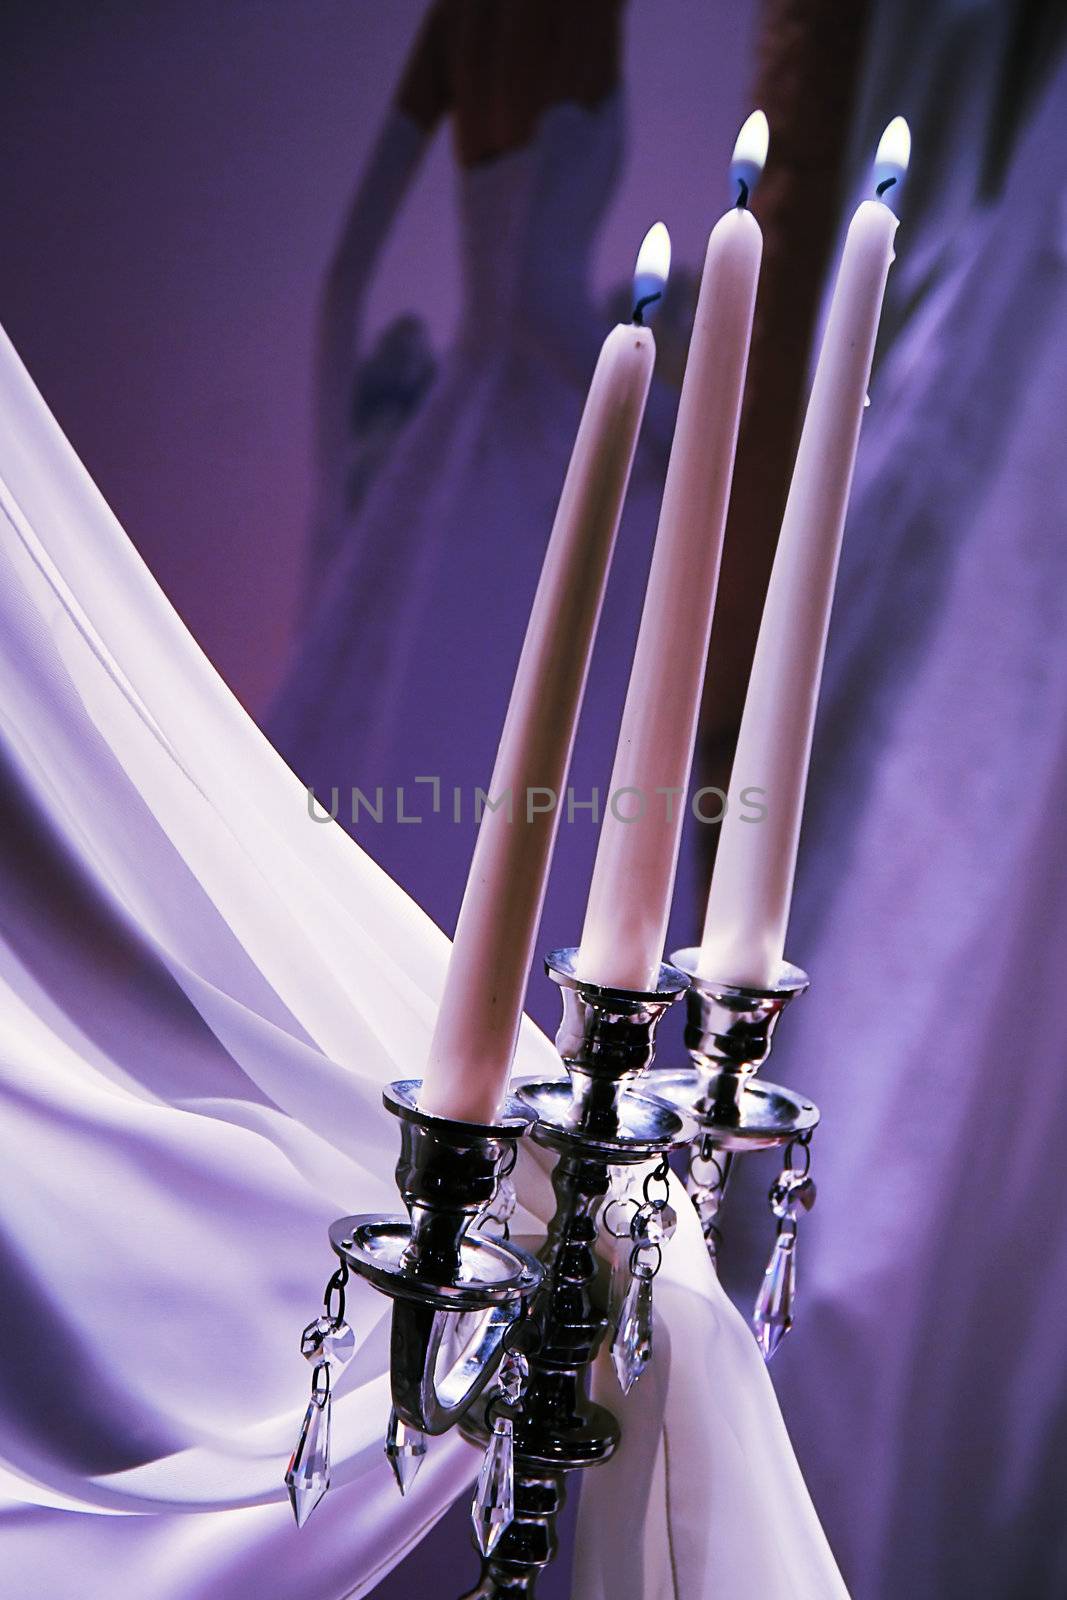 candles, decorations with vail on a wedding day